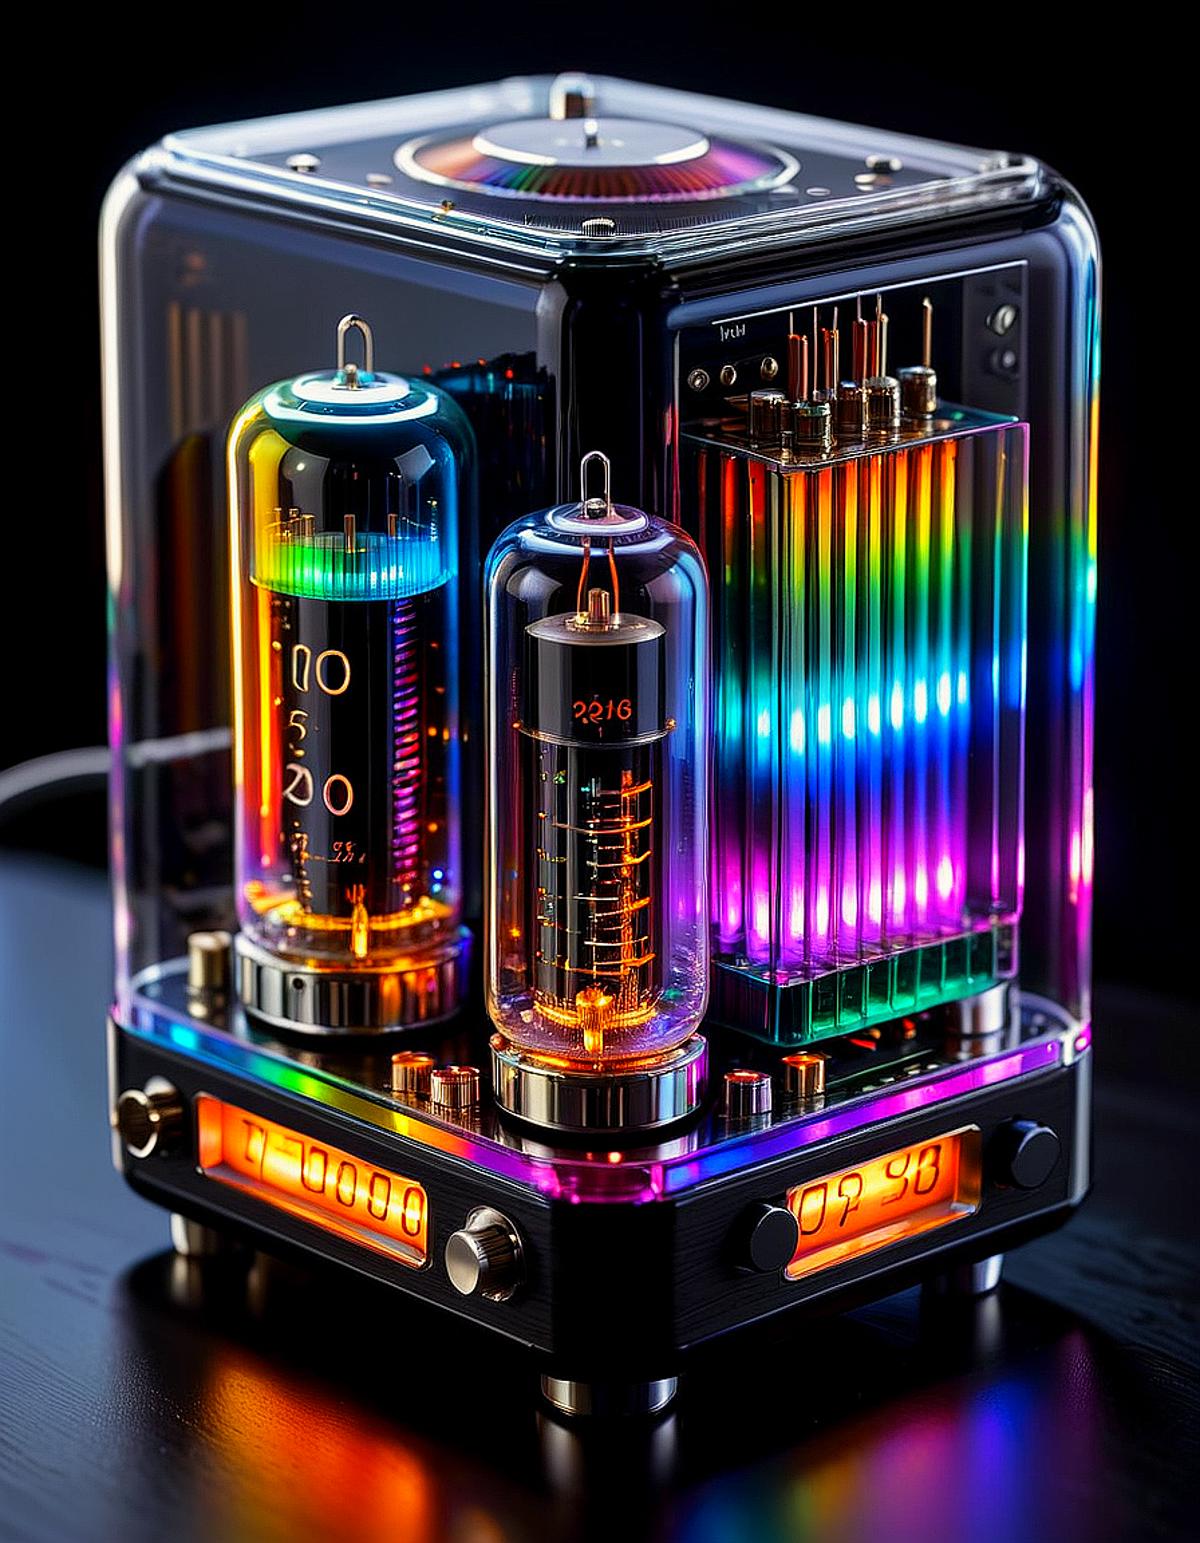 A colorful electronic device with a rainbow display.